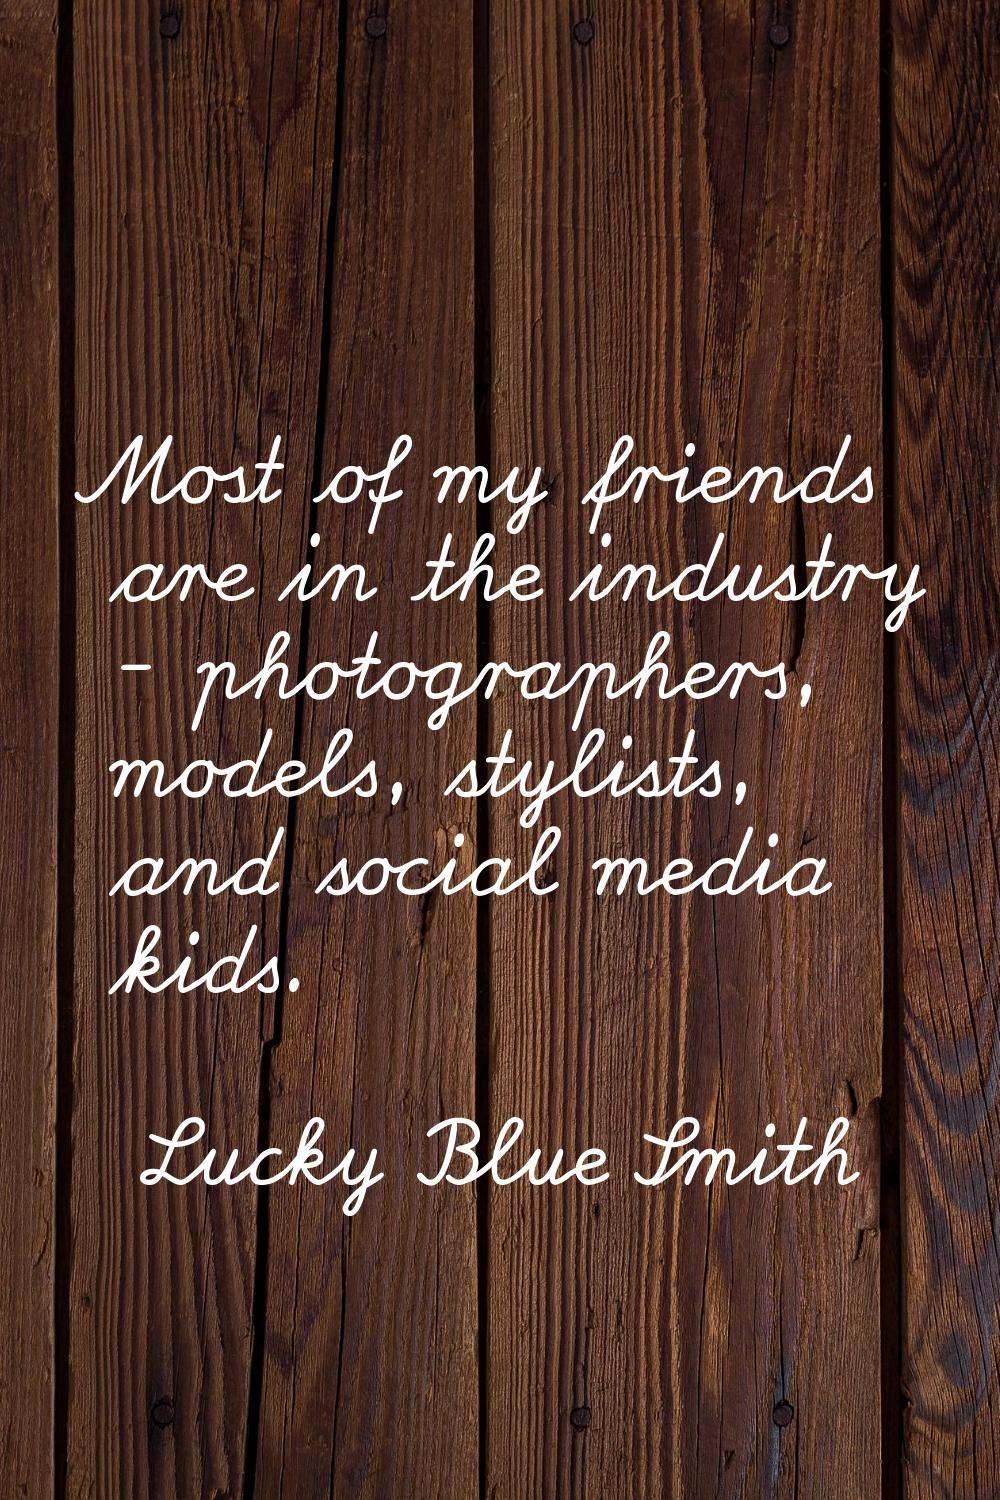 Most of my friends are in the industry - photographers, models, stylists, and social media kids.